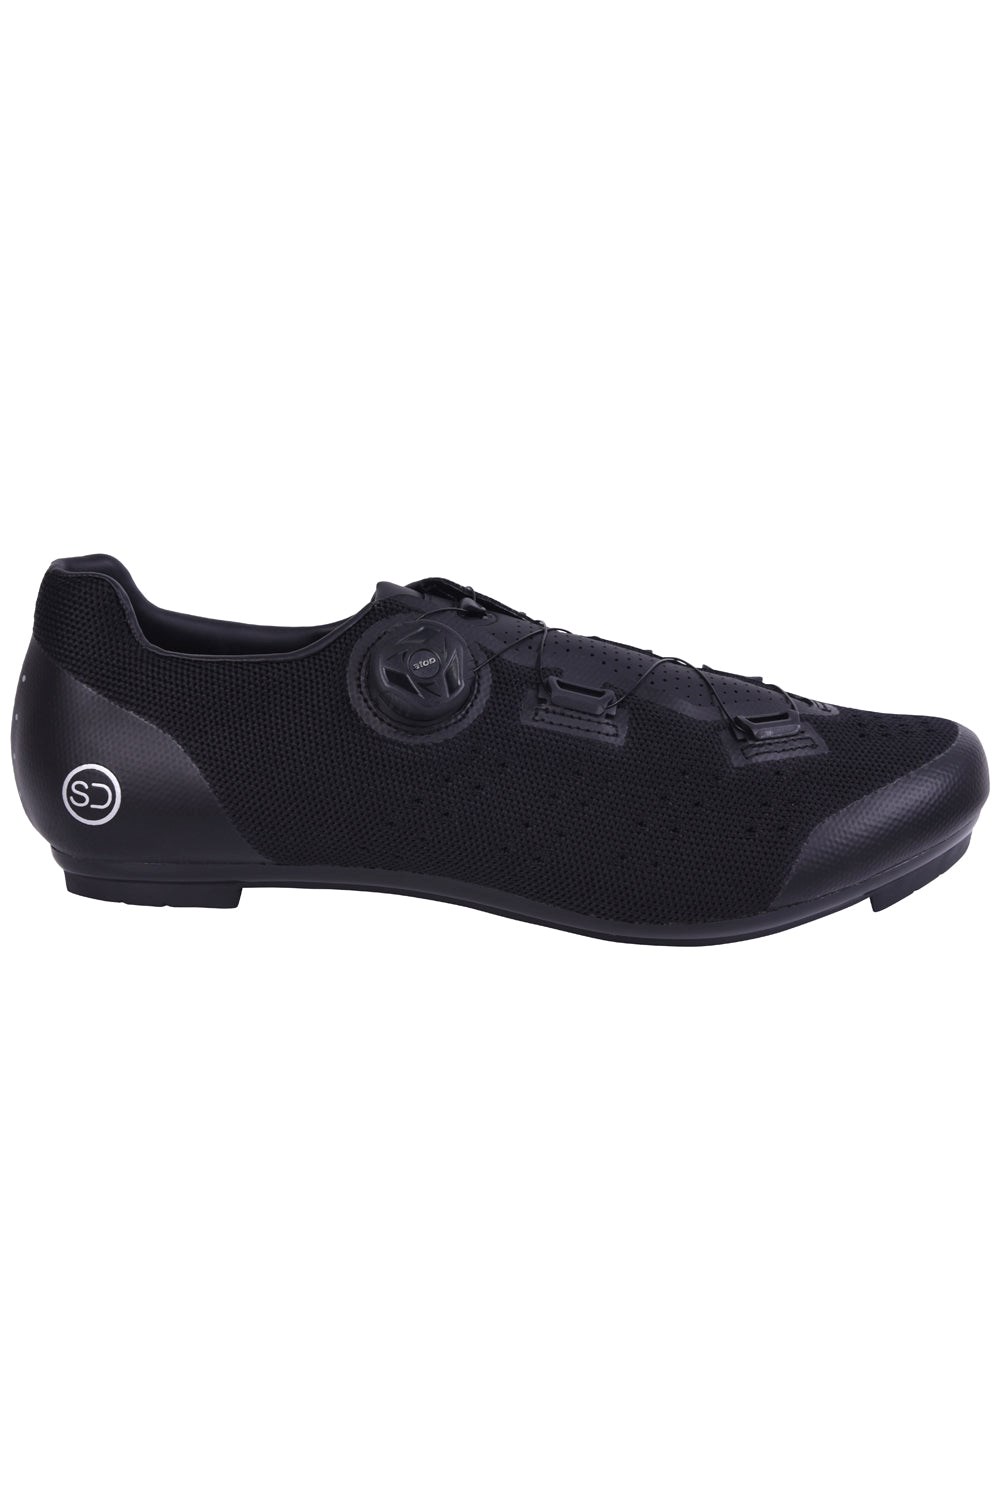 S-GT2 Mens Knit Road Cycle Shoes -